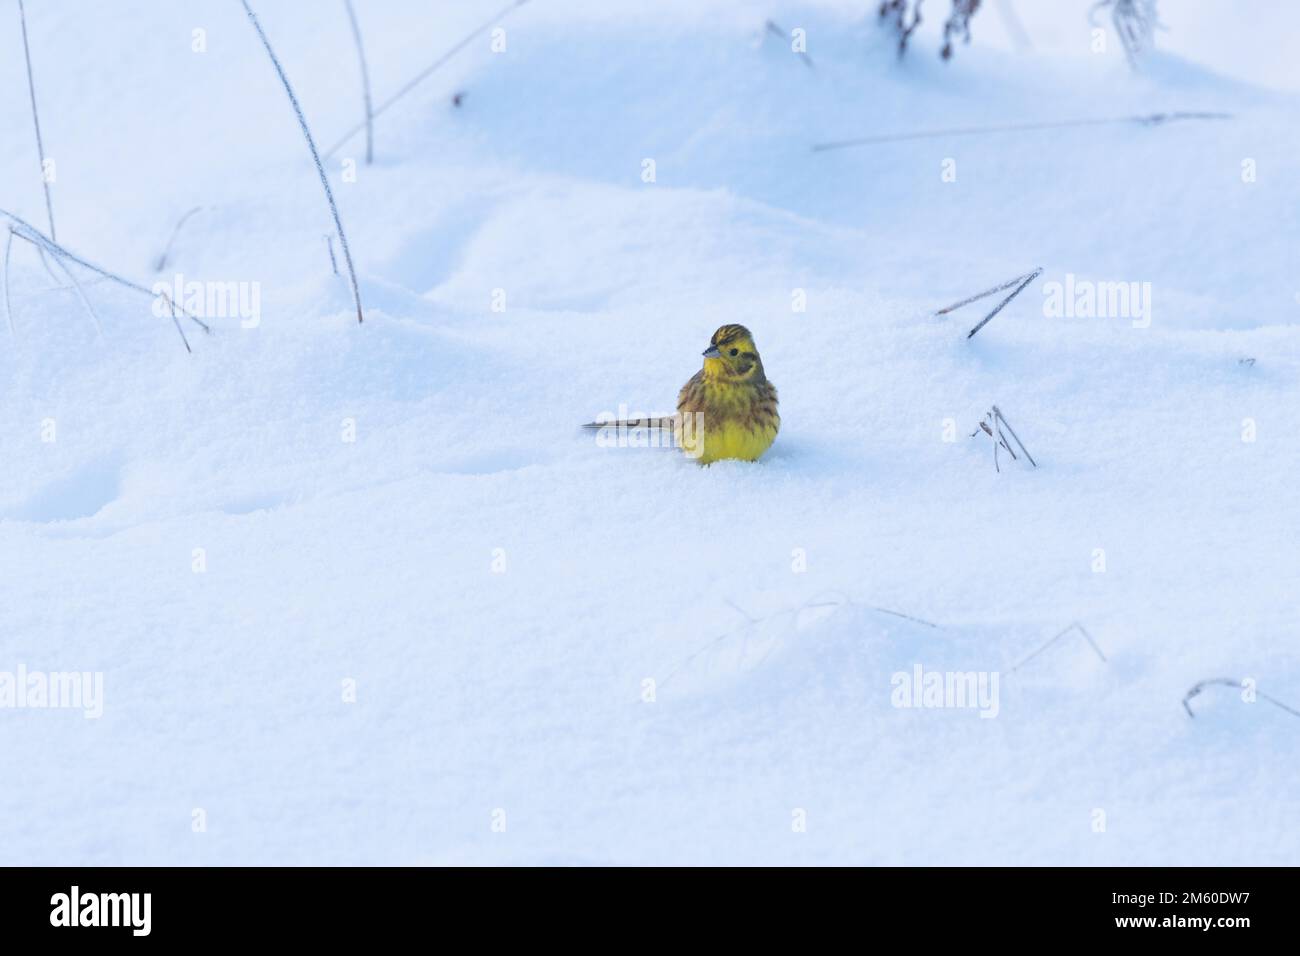 A colorful Yellowhammer standing on snowy ground on a cold winter evening in Estonia, Northern Europe Stock Photo